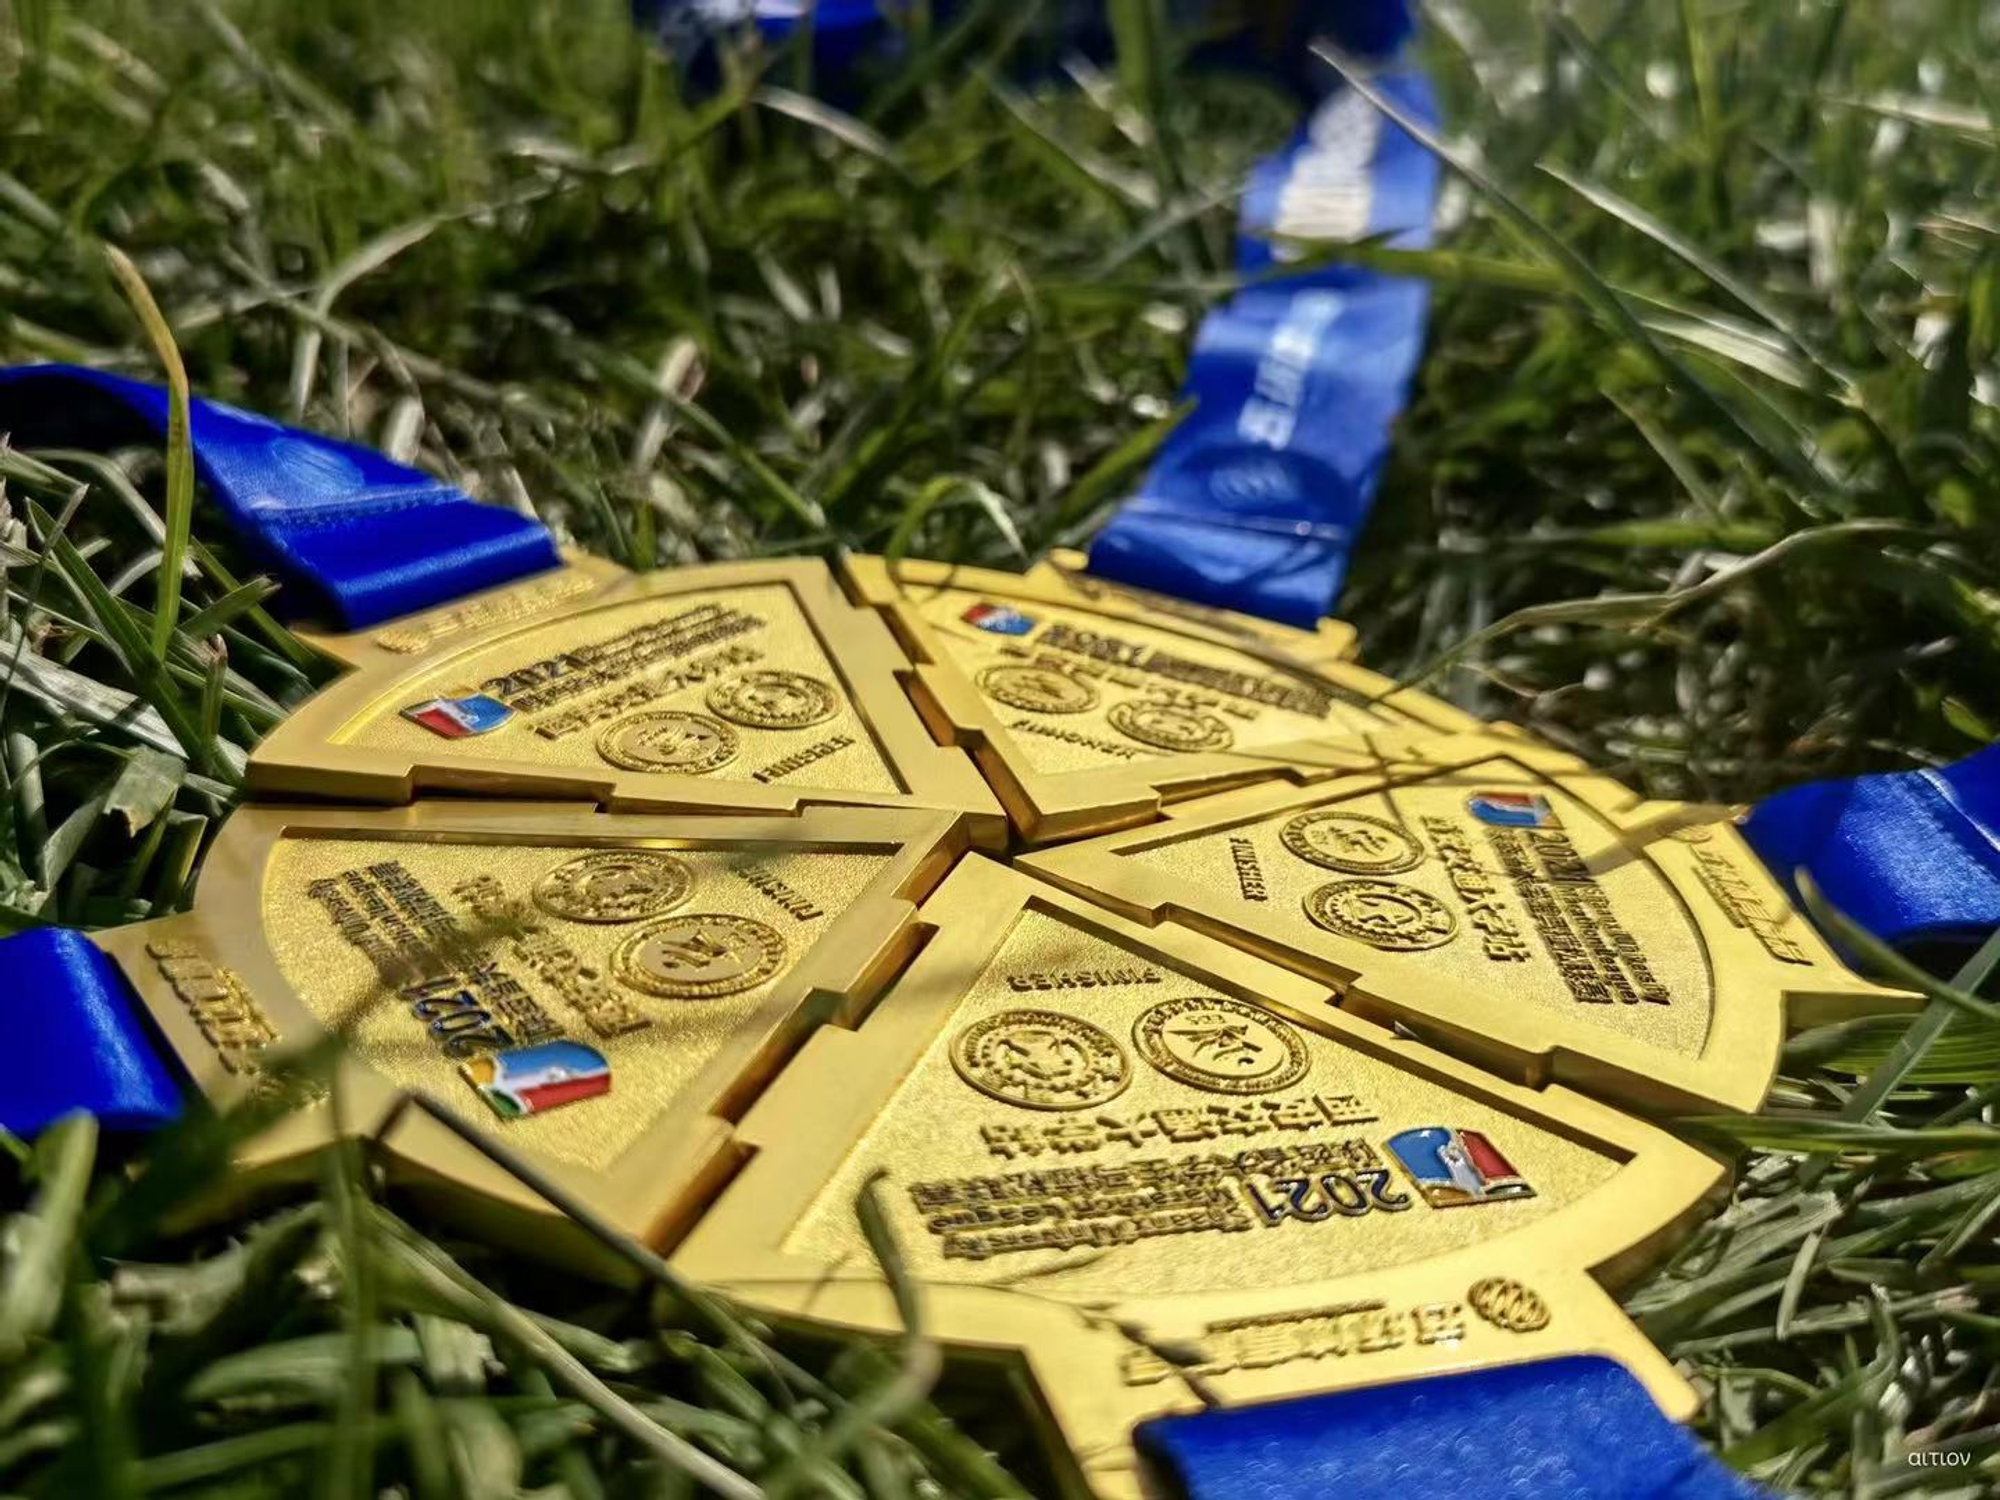 Medals of my team in a marathon race.